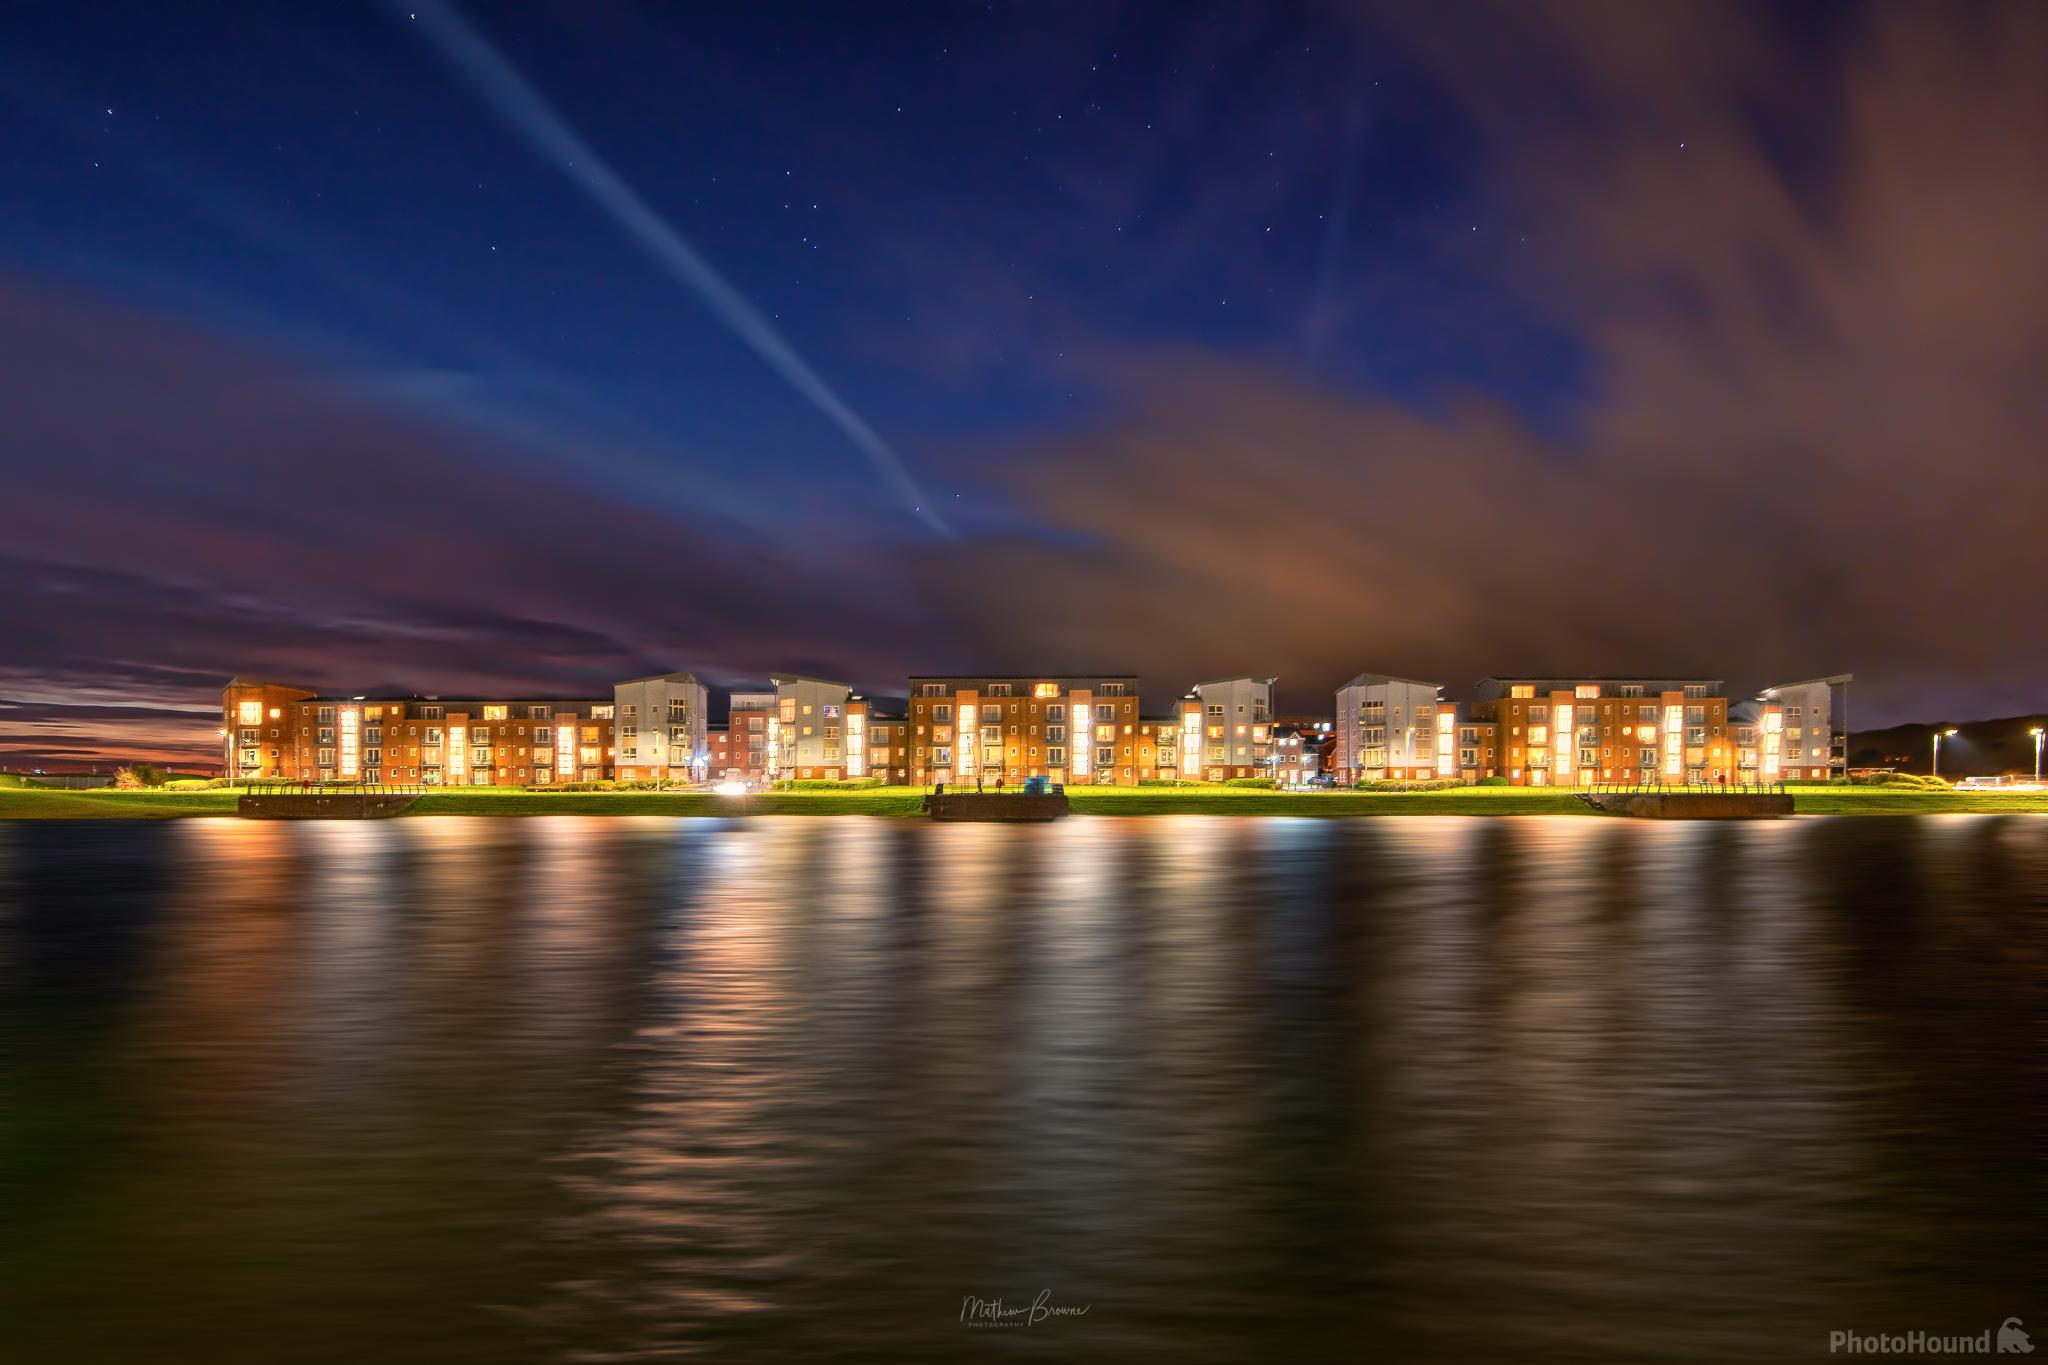 Image of North Dock by Mathew Browne